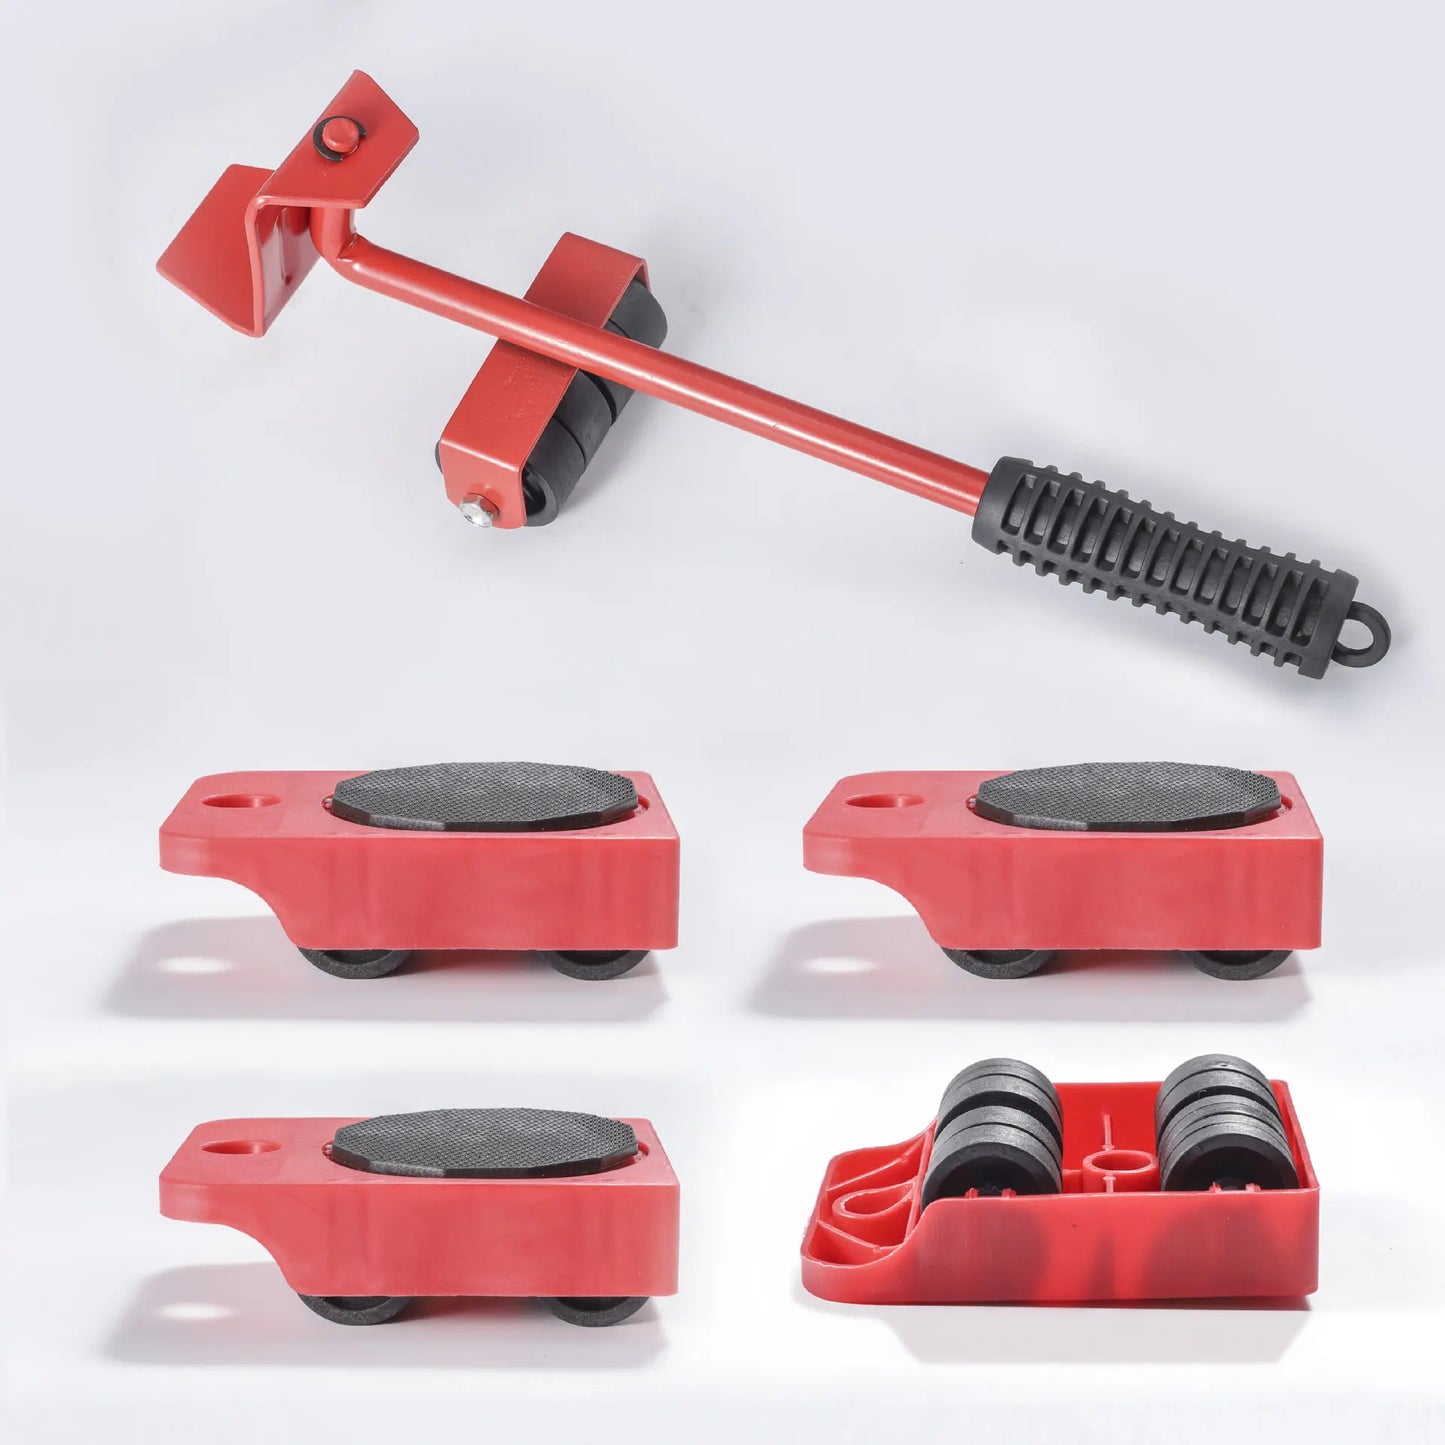 NEW EasyPusher - Practical furniture lifter and roller as an aid 5-piece set